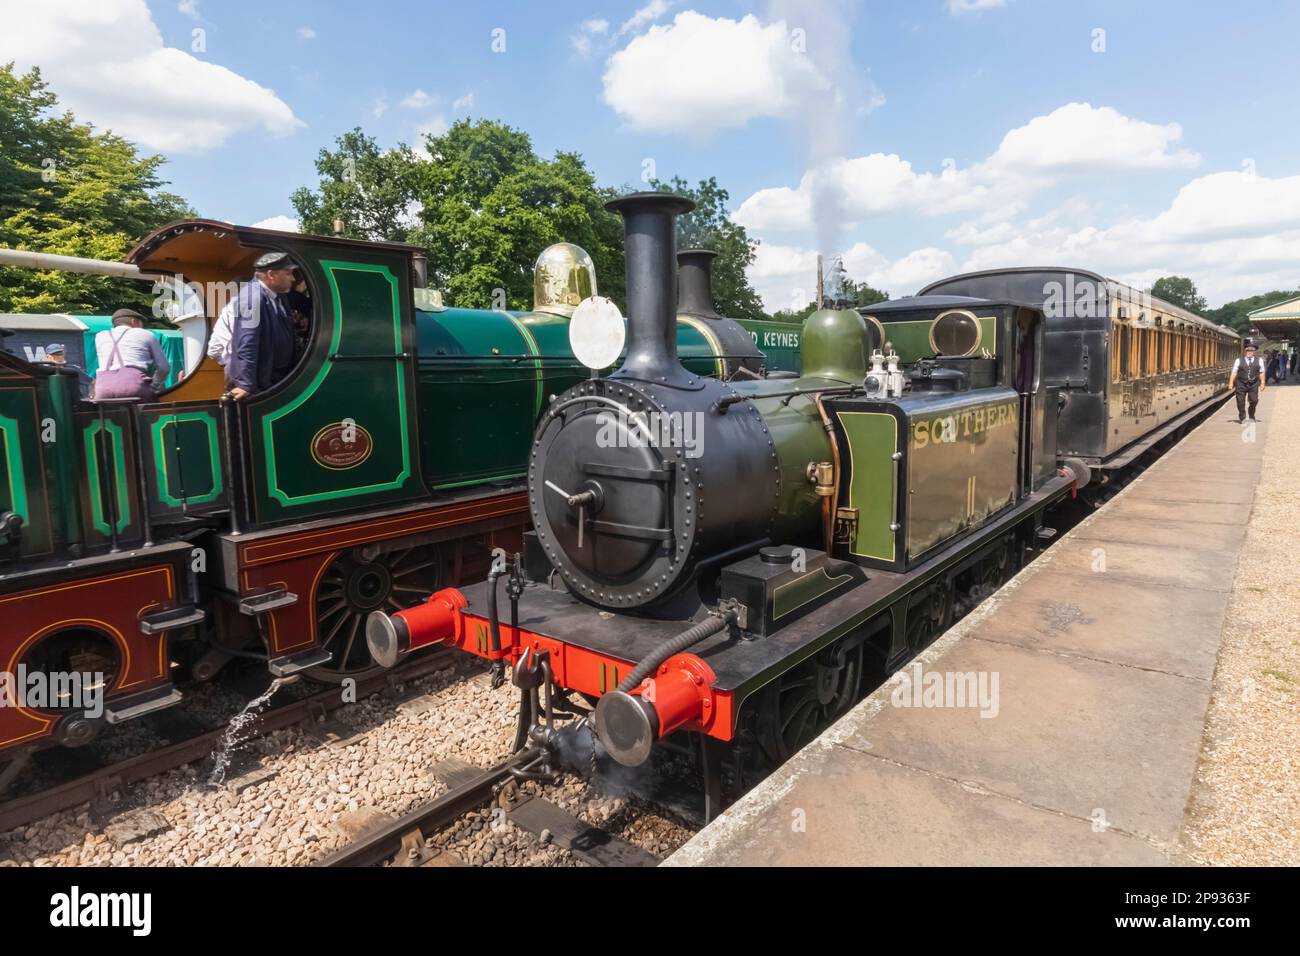 England, Sussex, Bluebell Railway, Horsted Keynes Station, Steam Trains Standing at Platform Stock Photo